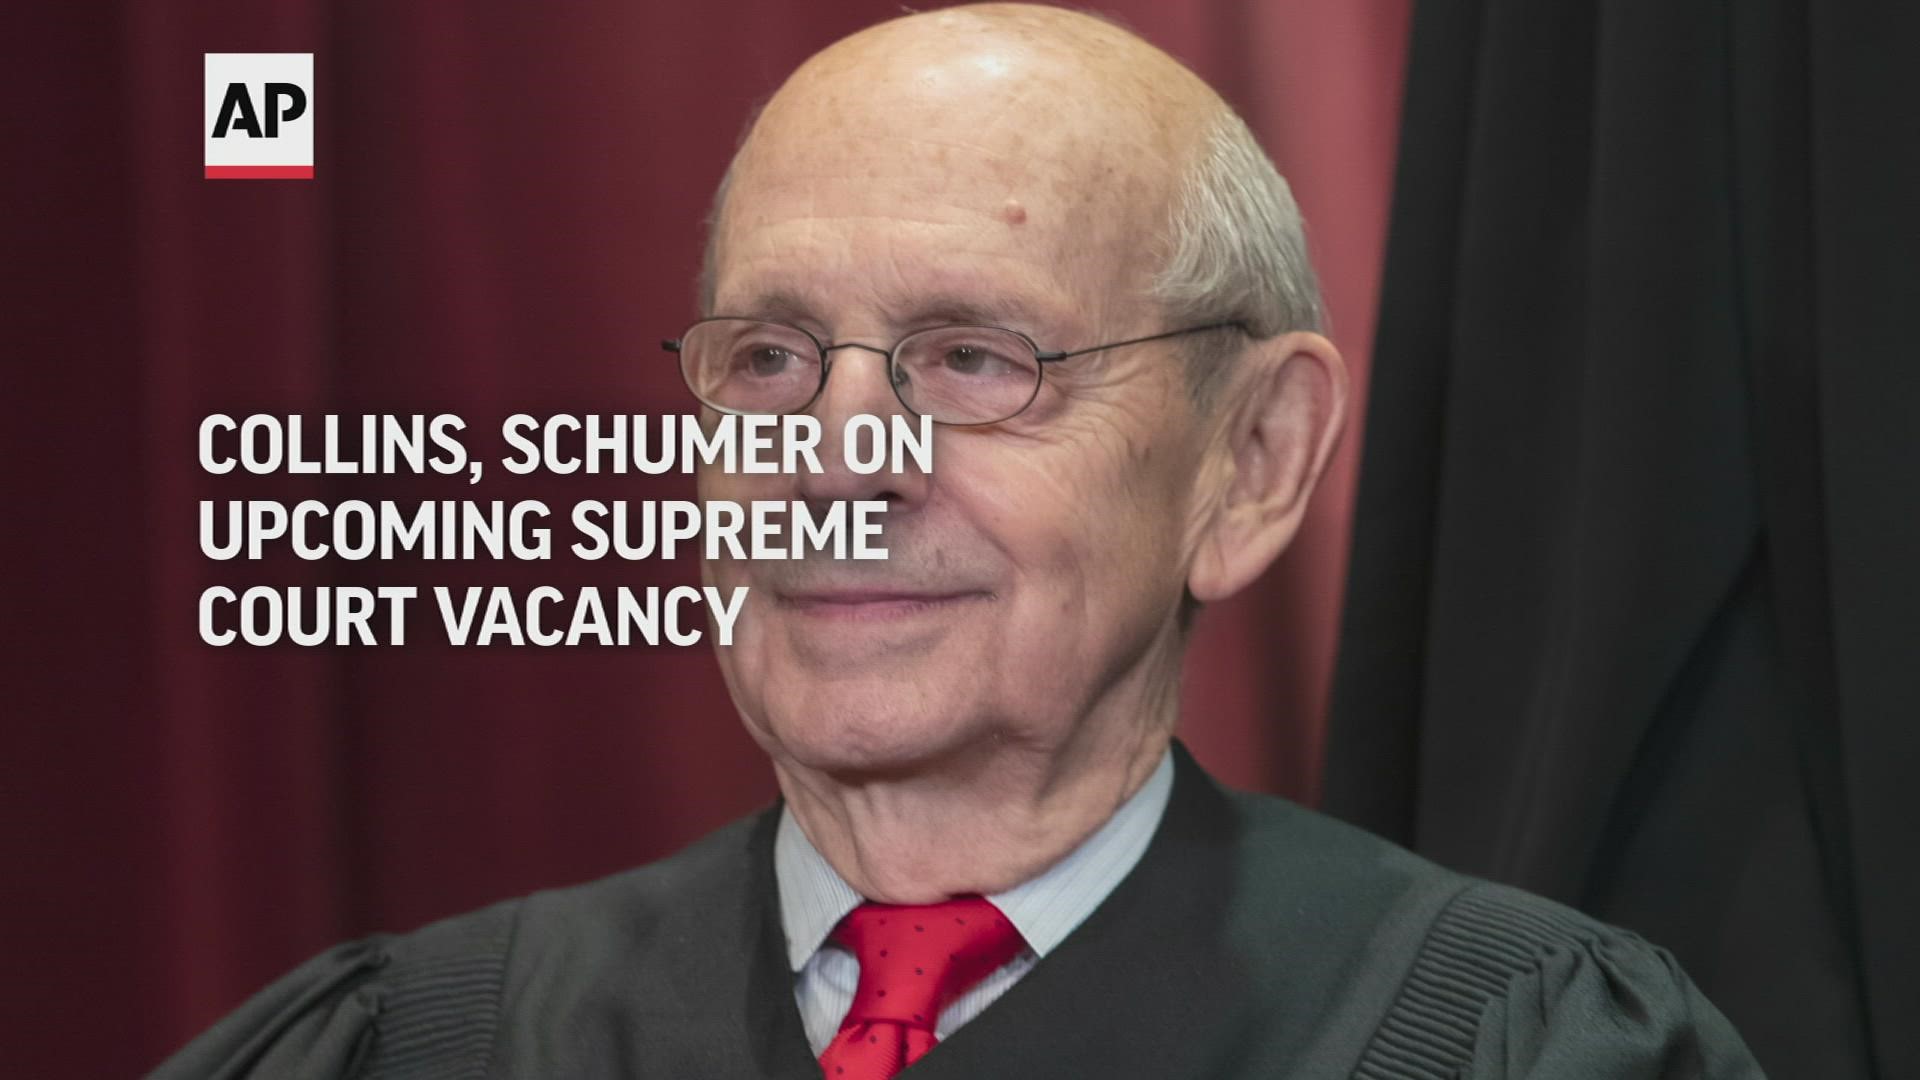 Collins and Schumer offer their thoughts on the upcoming Supreme Court vacancy.